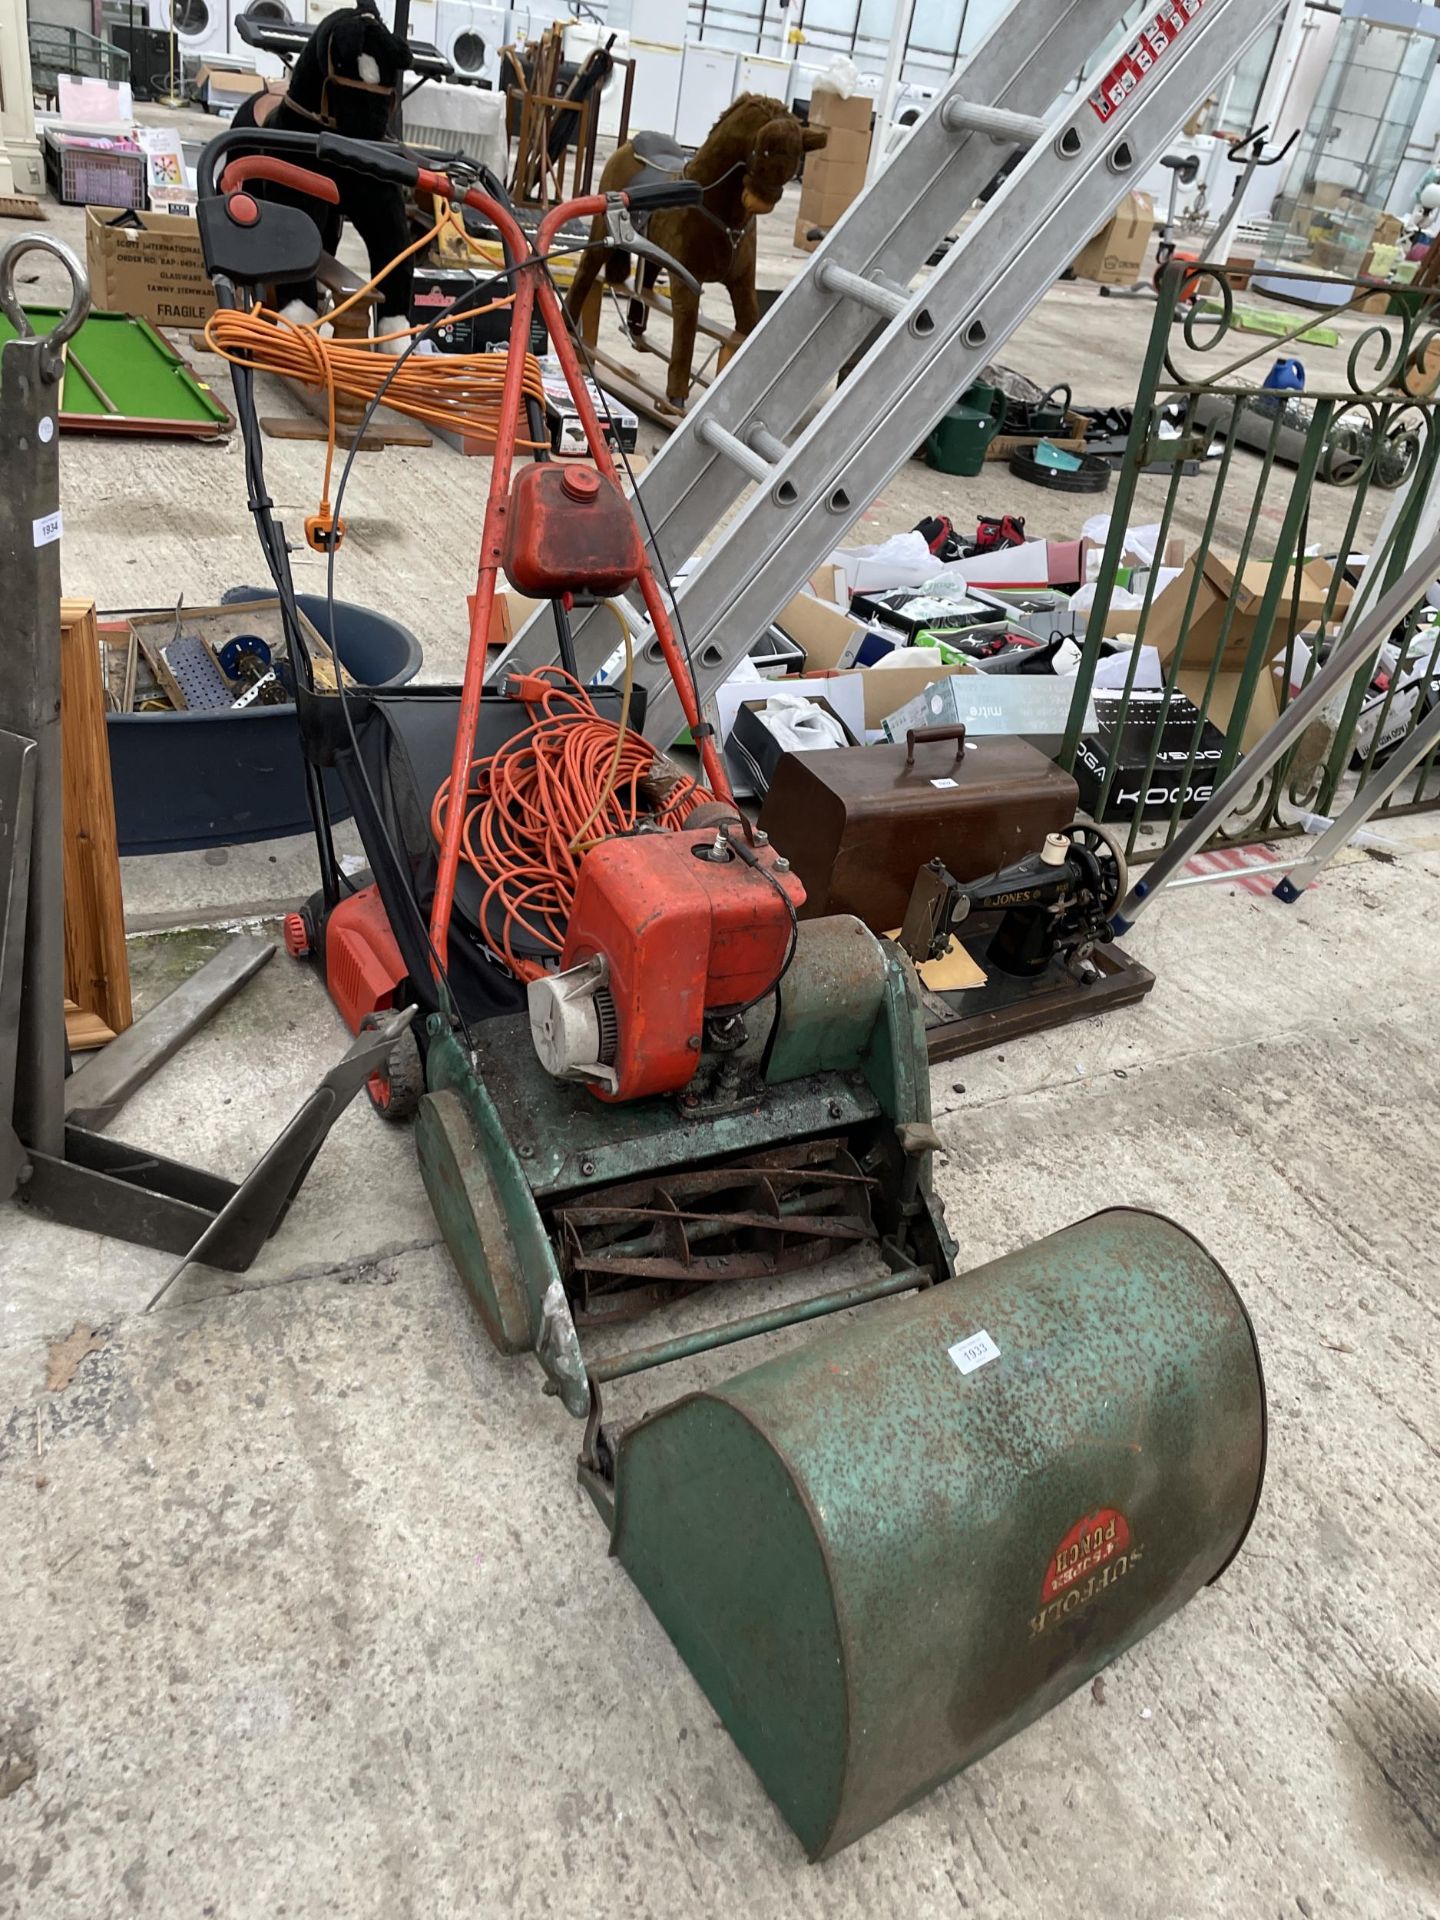 AN ELECTRIC BLACK AND DECKER LAWN MOWER AND A SUFFOLK PUNCH ROTARY LAWN MOWER